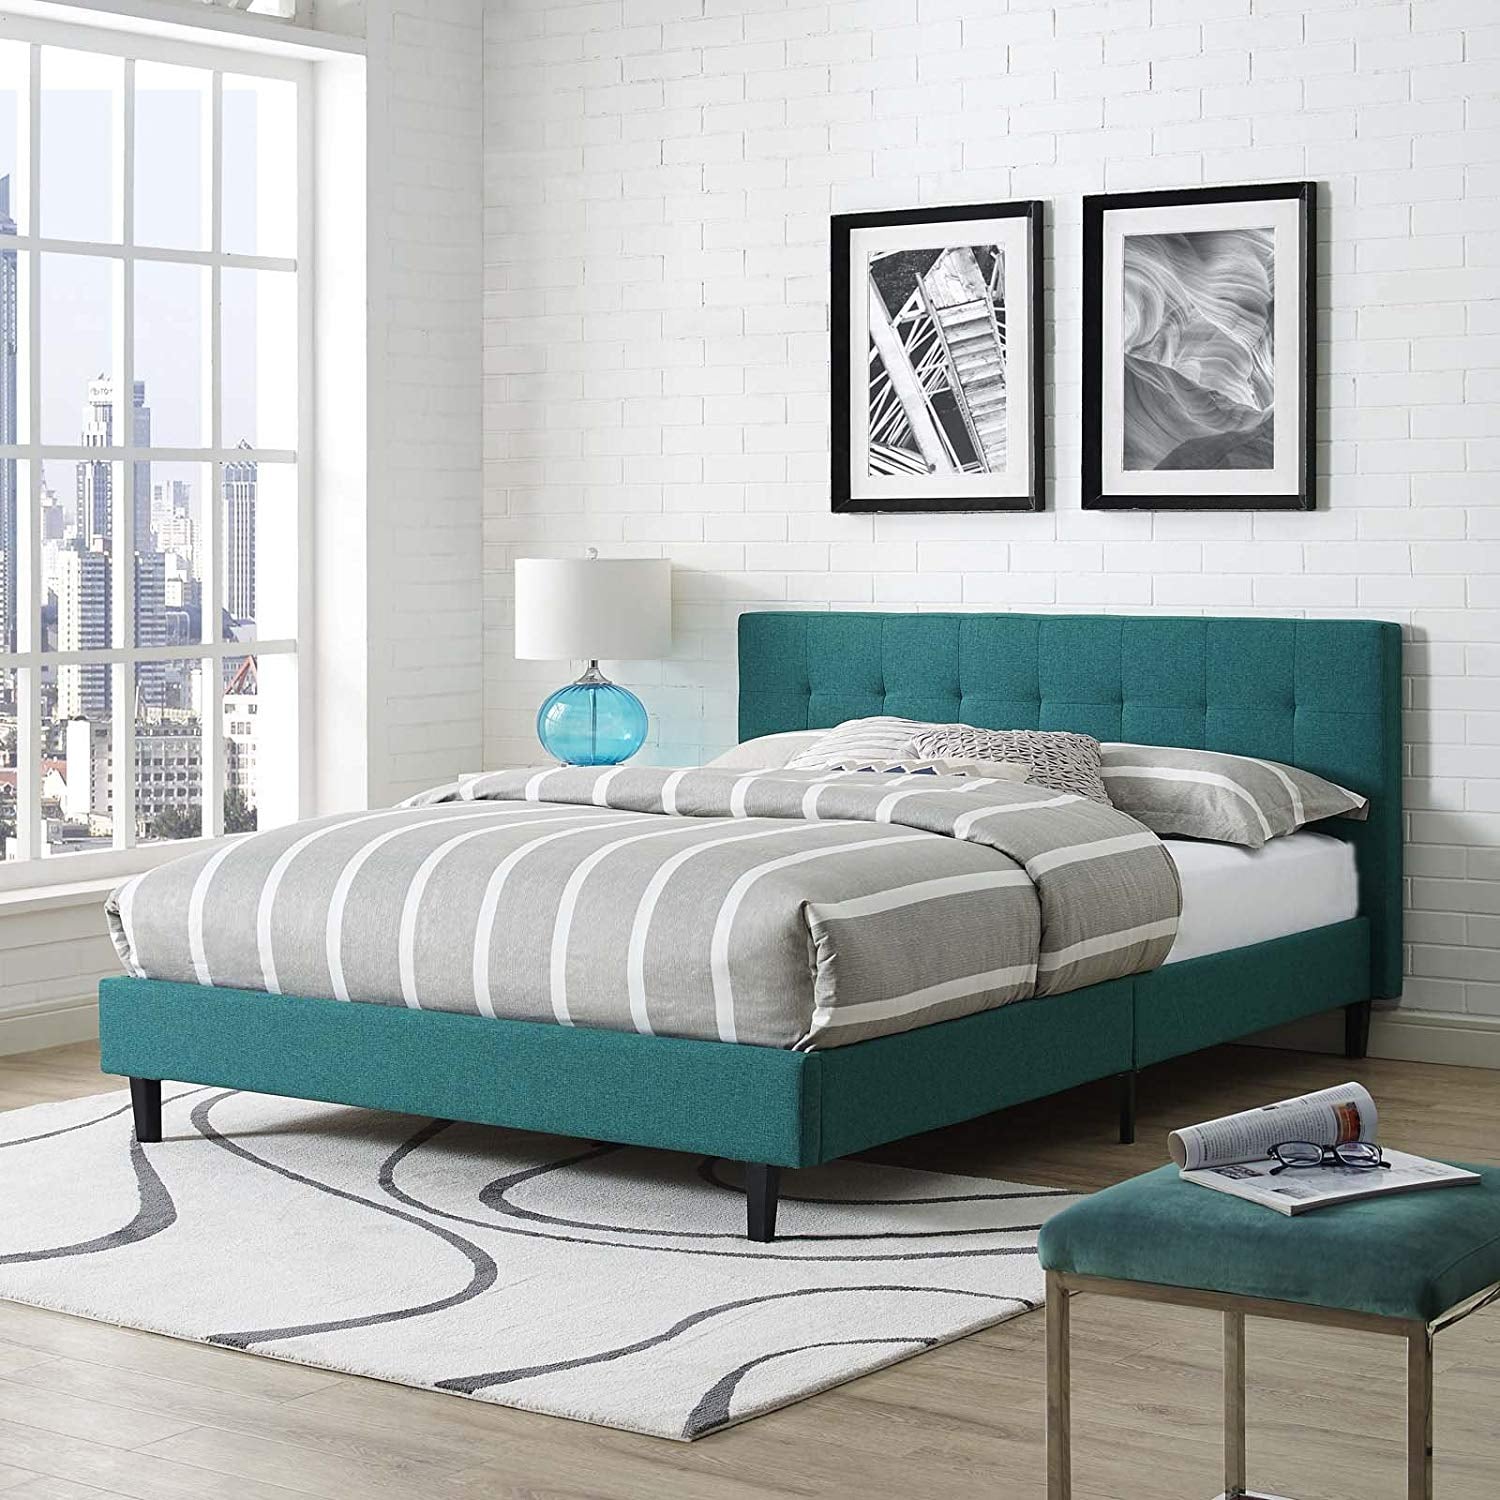 Add A Pop Of Color To The Room Amazon S Bedroom Furniture Just Blew Us Away Shop Our Favorites Starting At Just 35 Popsugar Home Photo 16